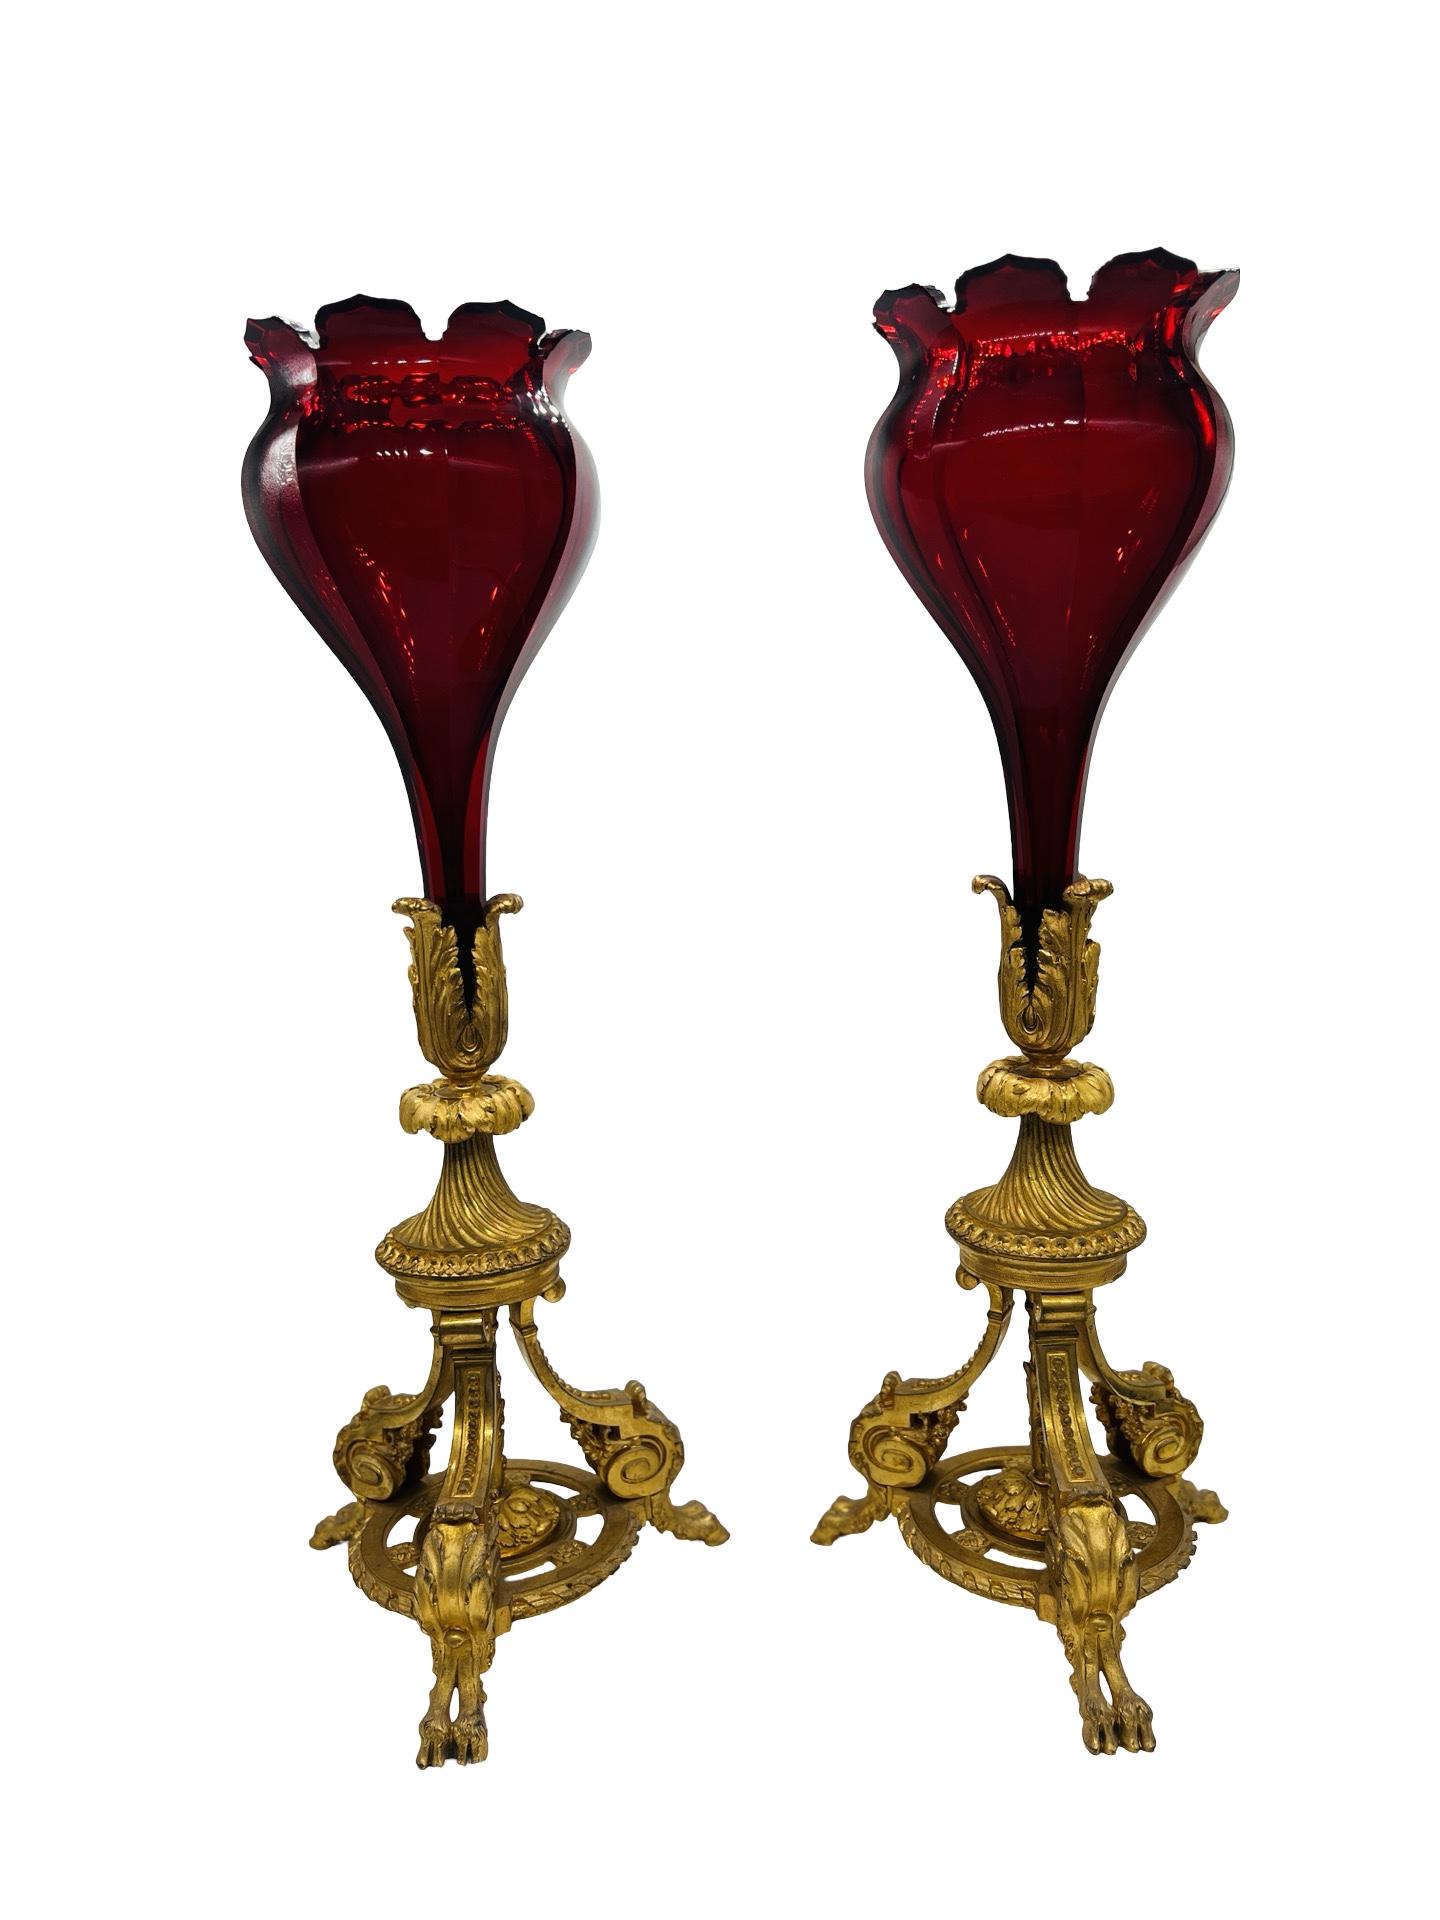 Exceptional - Baccarat Ruby Red Glass & Bronze Ormolu Neoclassical Trumpet Vases In Good Condition For Sale In Atlanta, GA